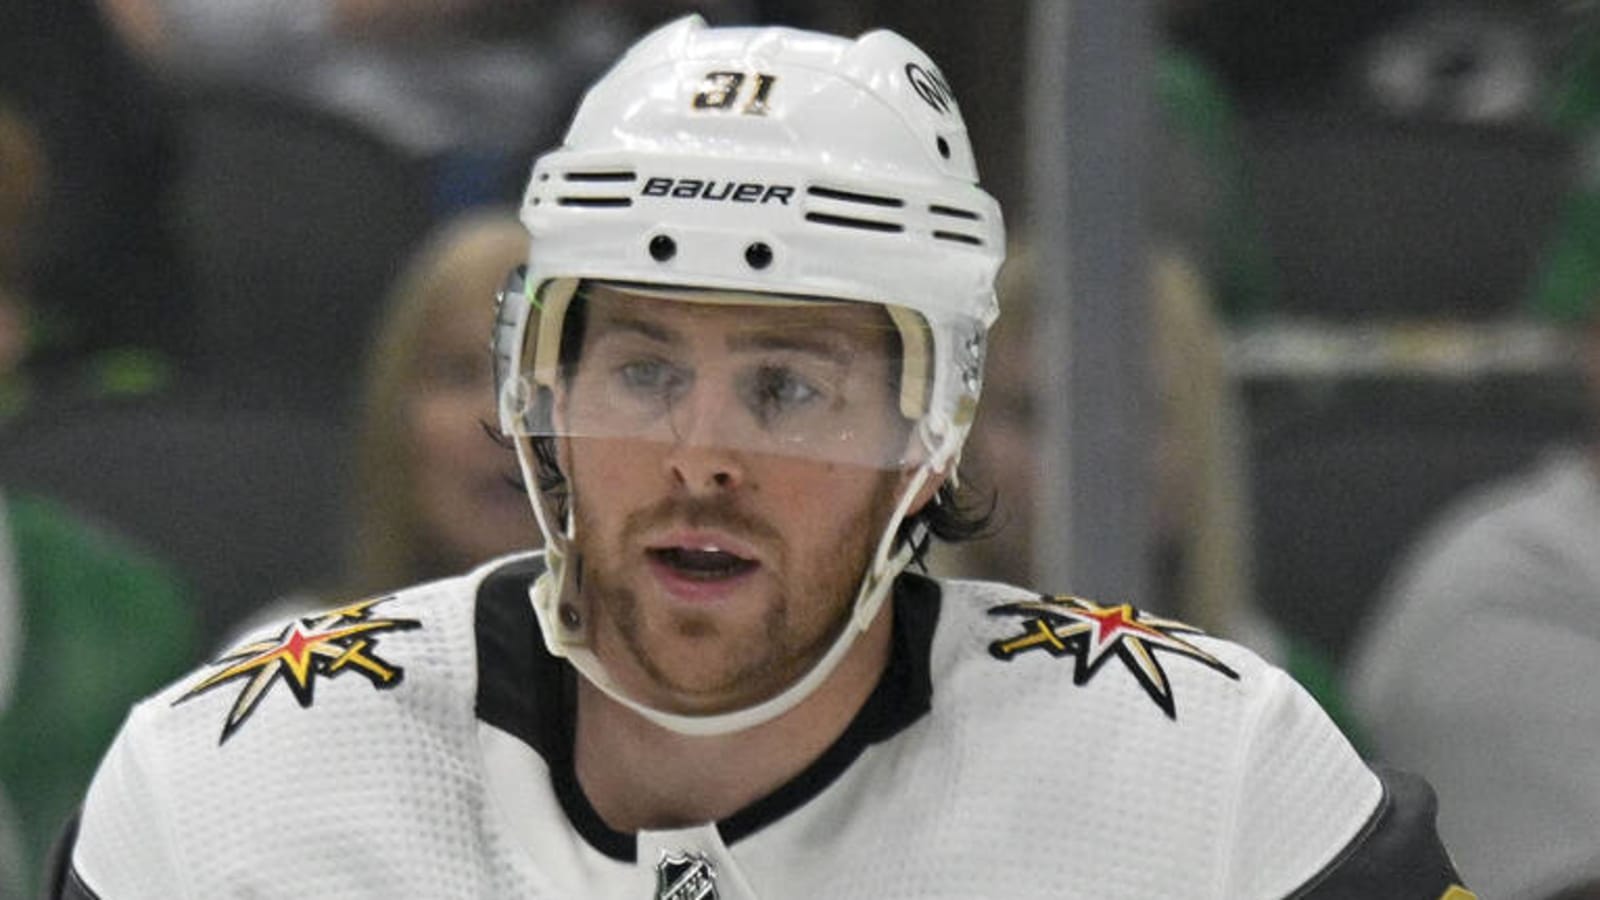 Golden Knights: Is Marchessault in His Final Days as a Vegas Golden Knight?